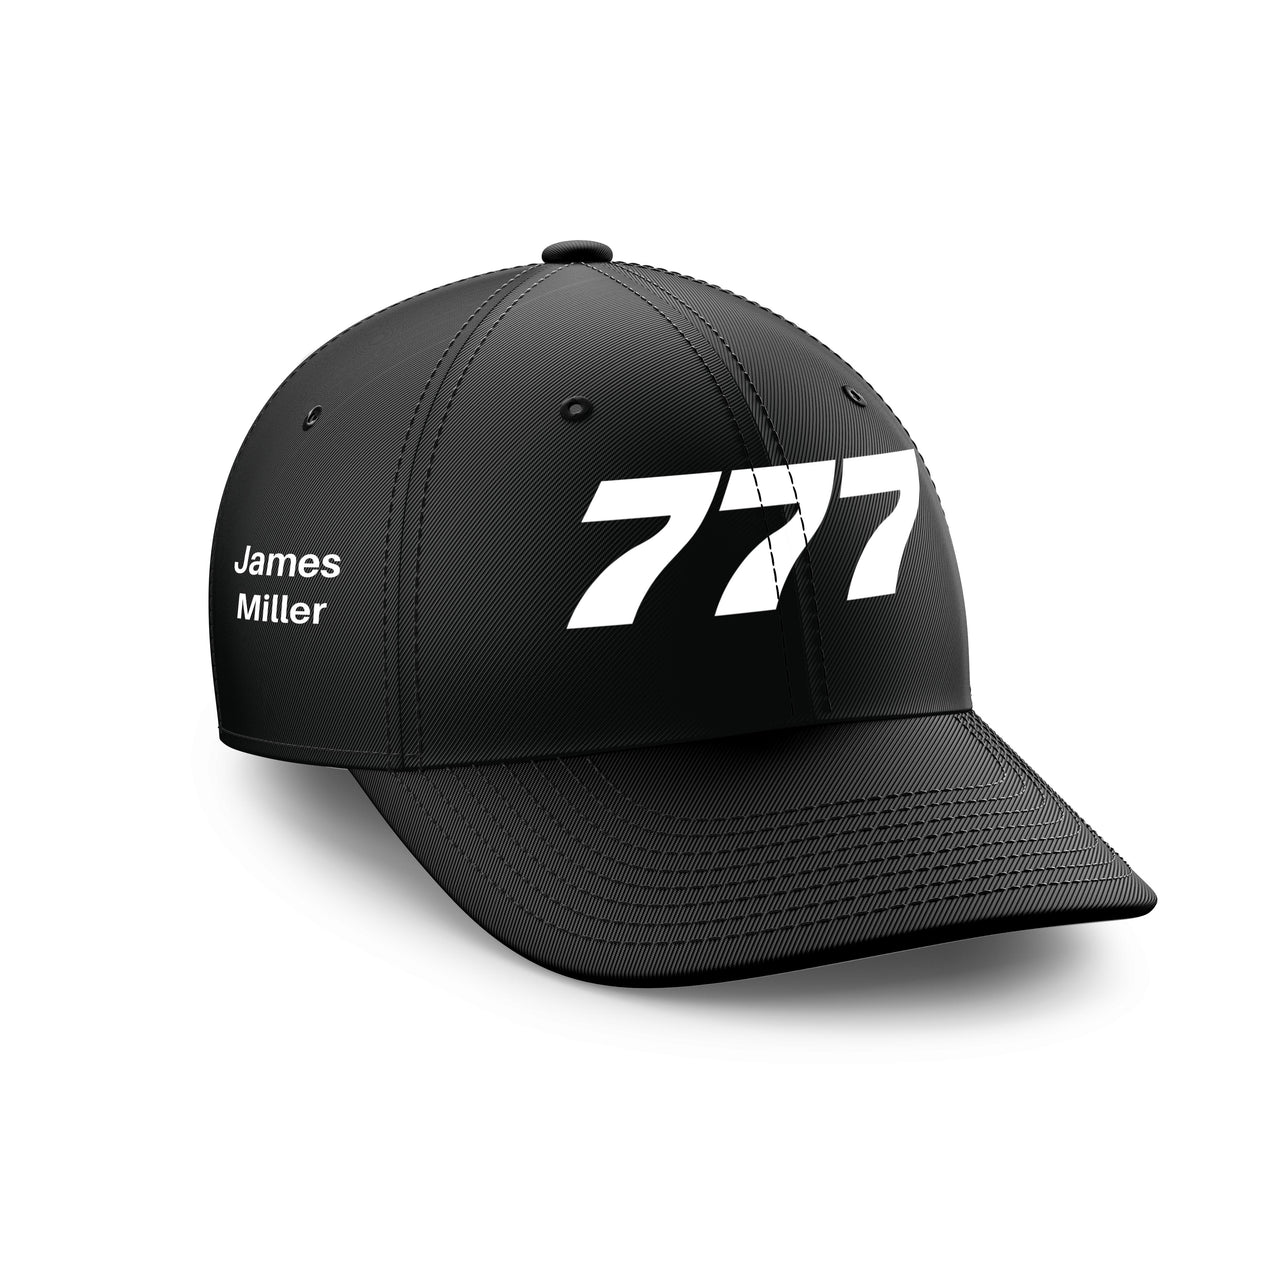 Customizable Name & 777 Flat Text Embroidered Hats